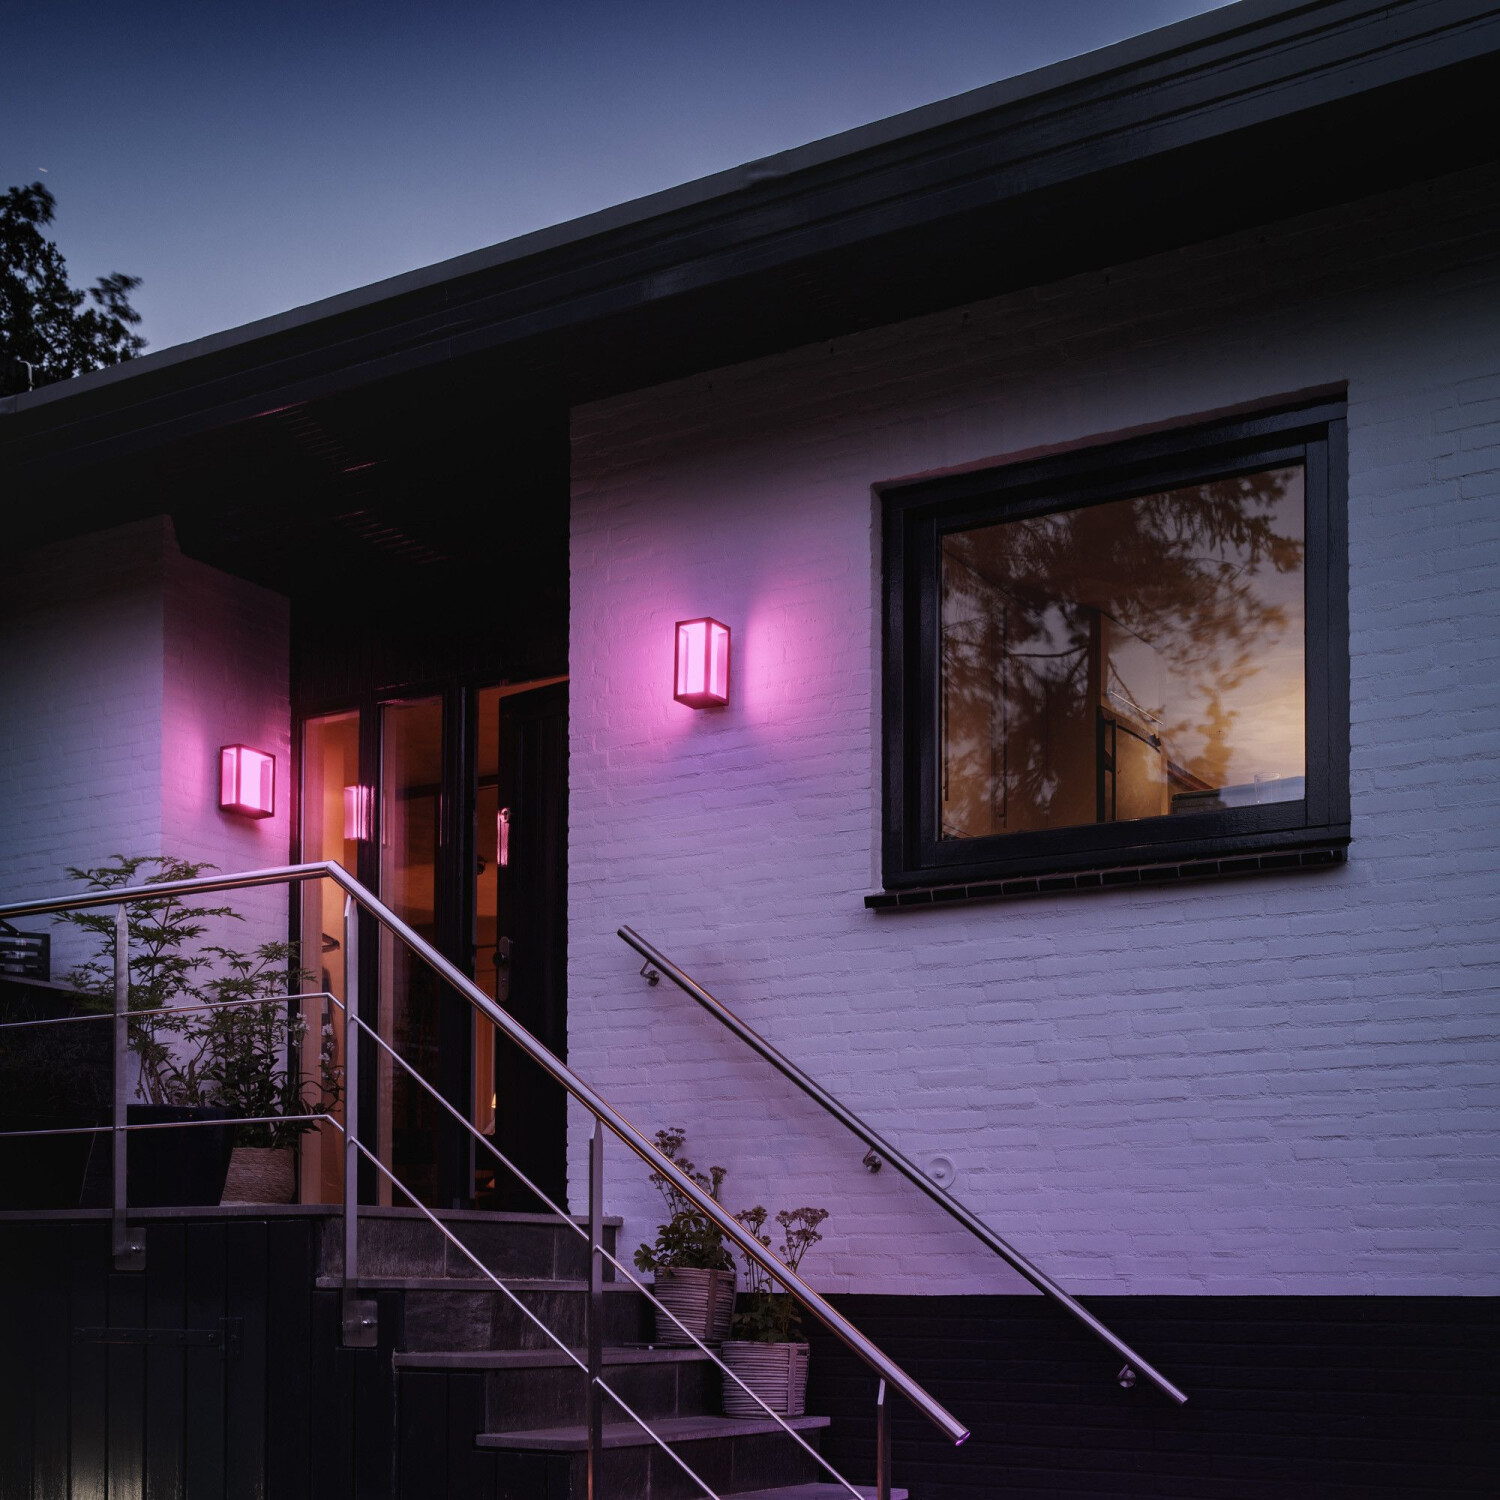 Philips Hue White and LED 94,99 (17429/30/P7) | Ambiance Impress € Preisvergleich ab bei Color